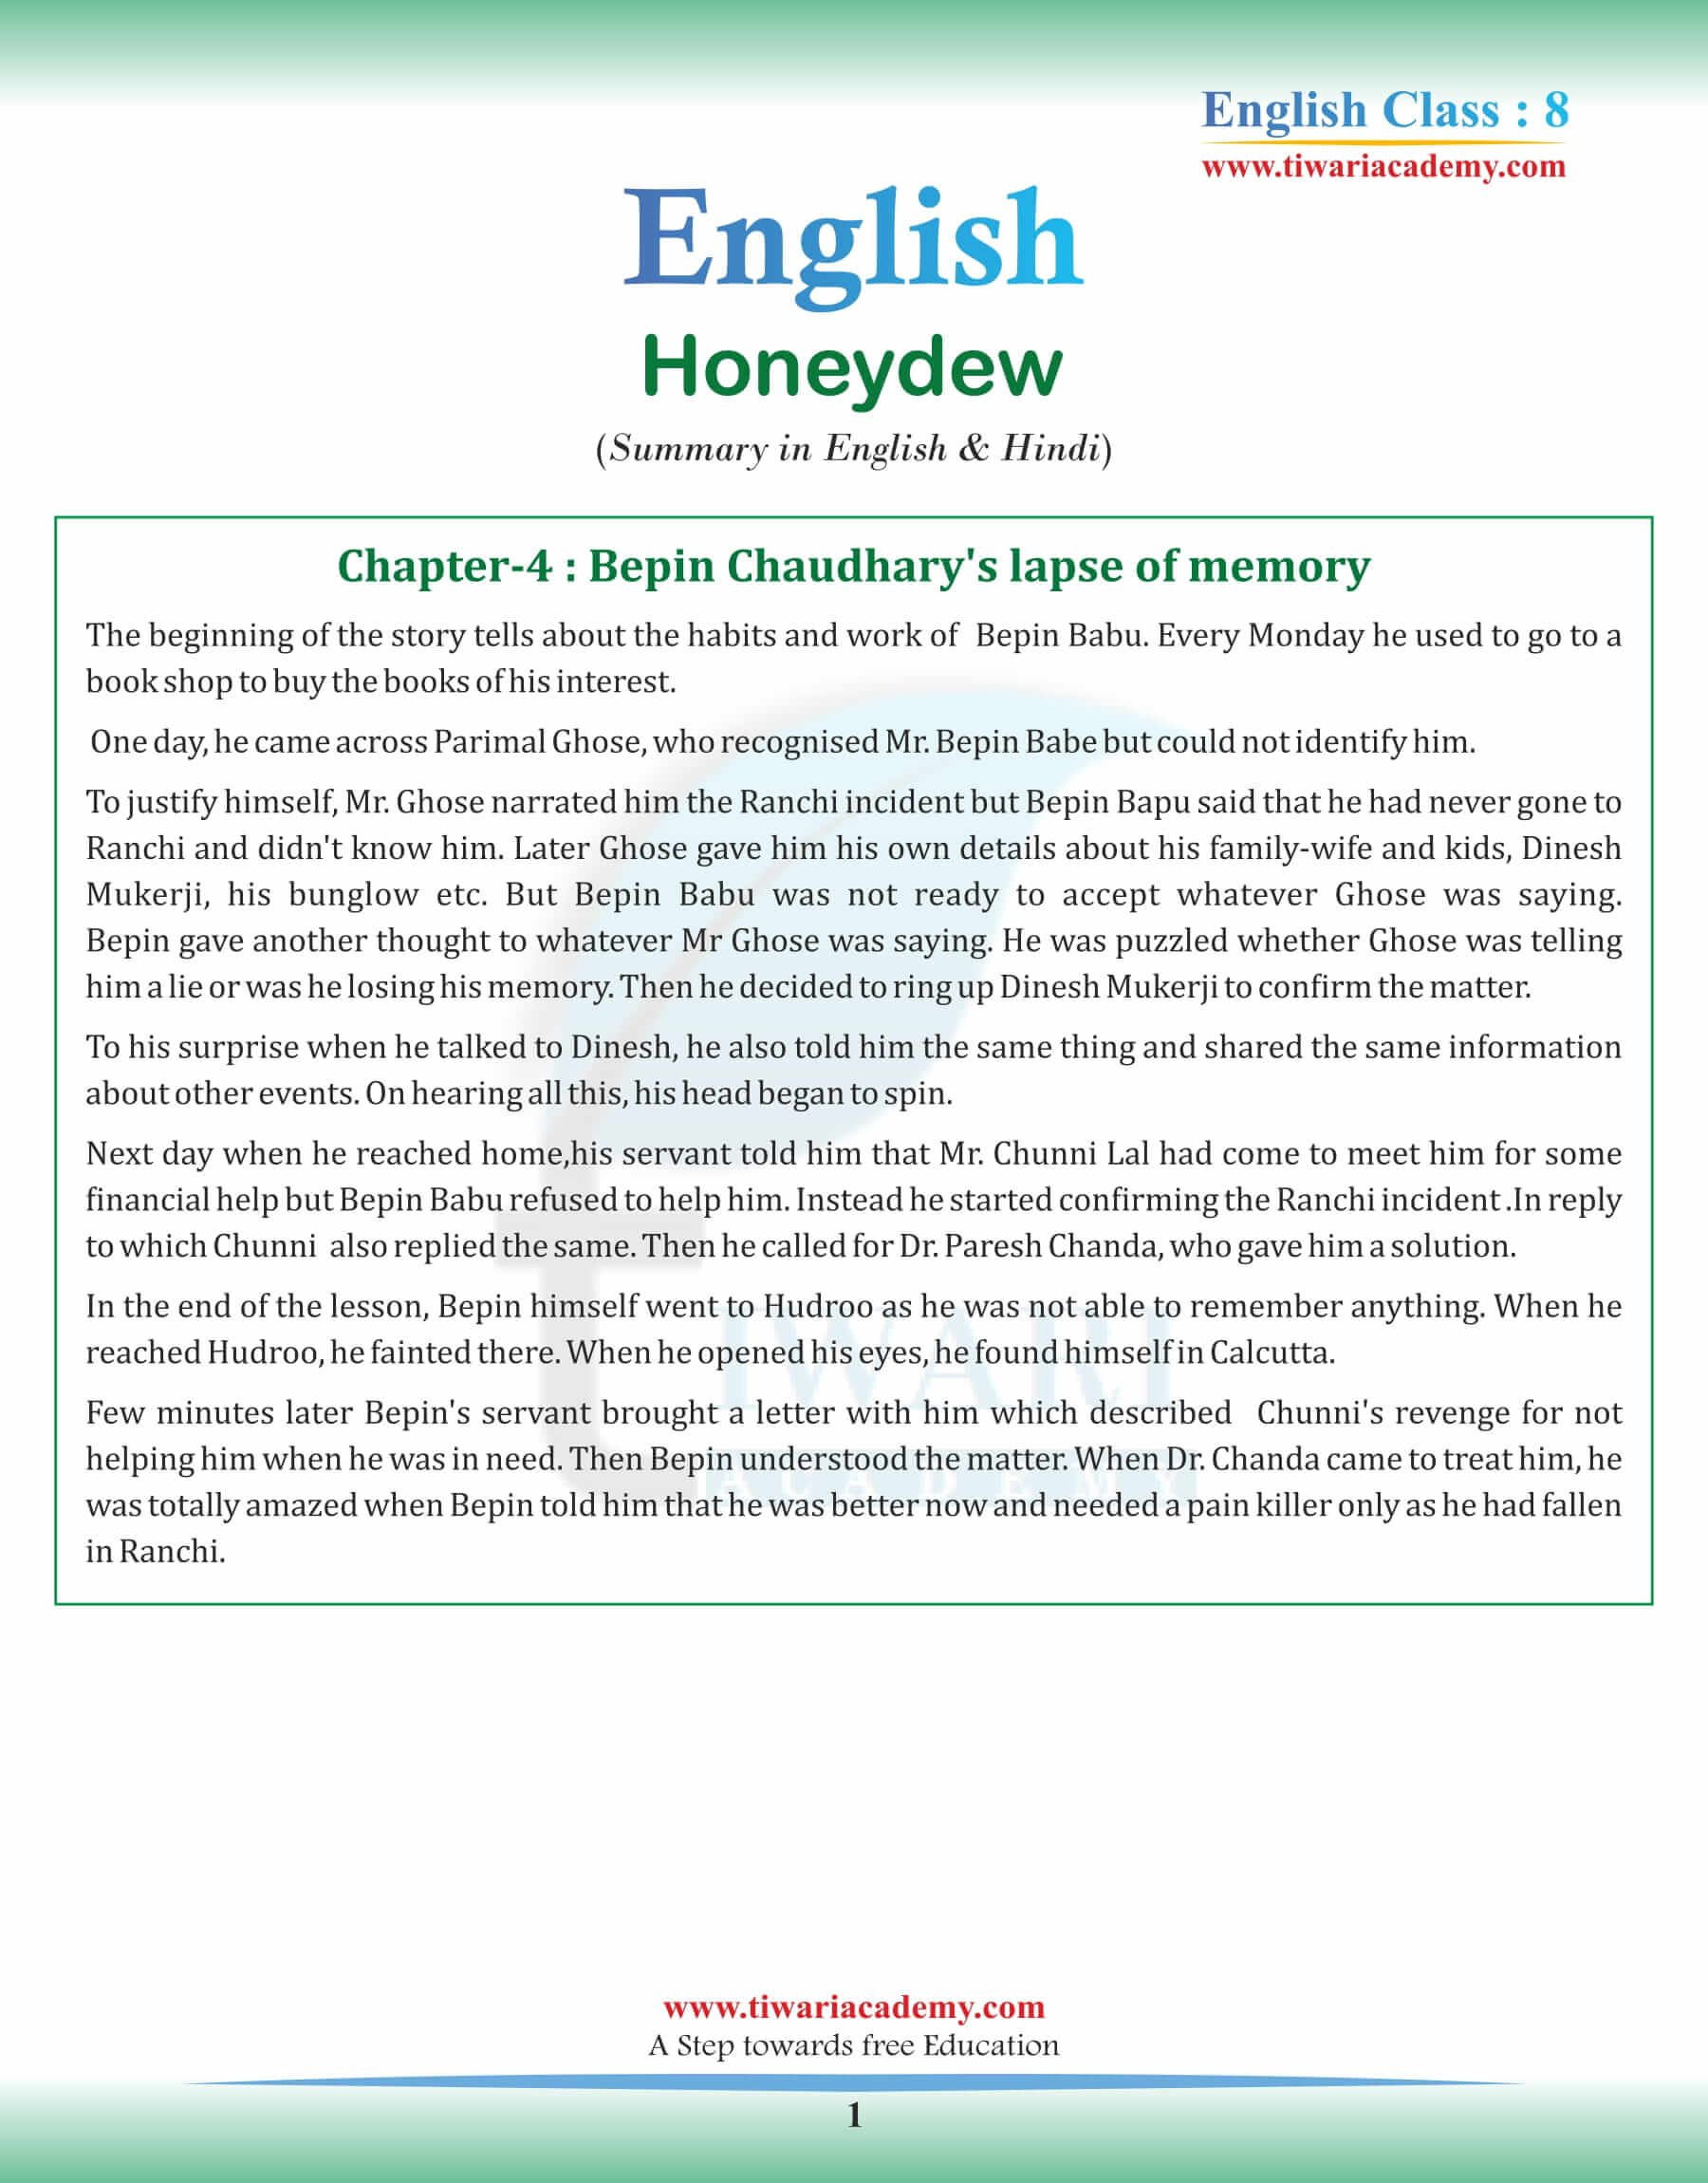 Class 8 English Chapter 4 Summary in English